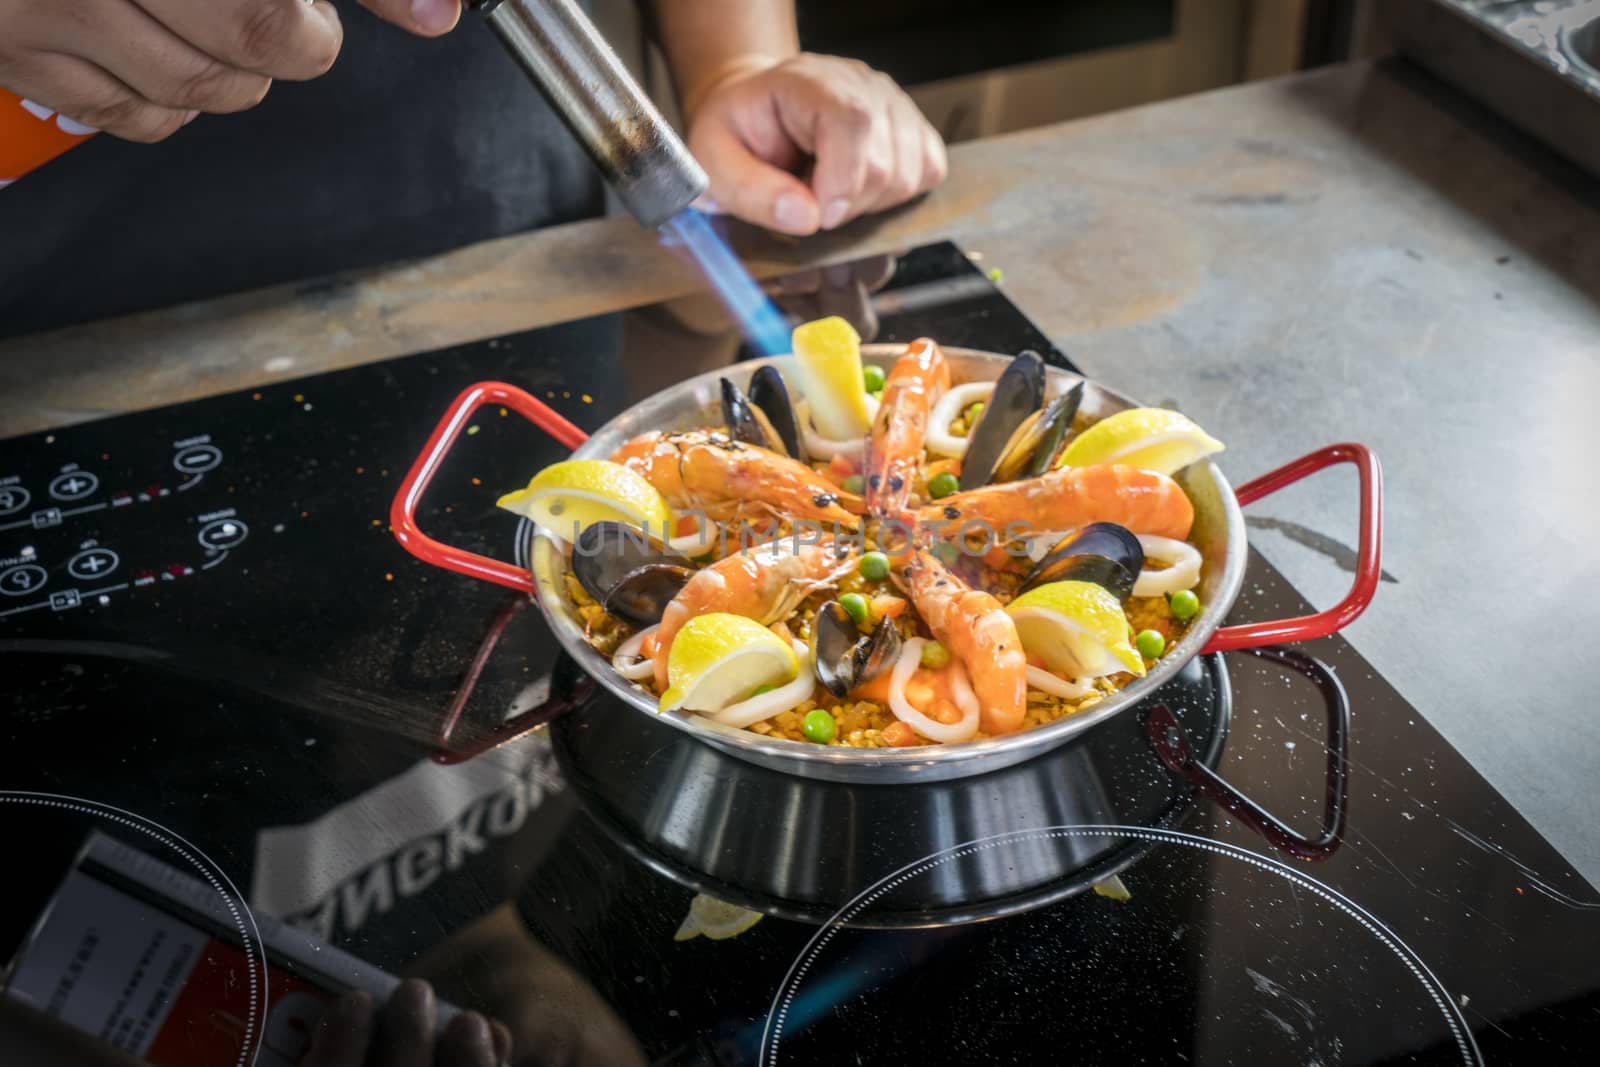 Chef is frying seafood of paella with burner